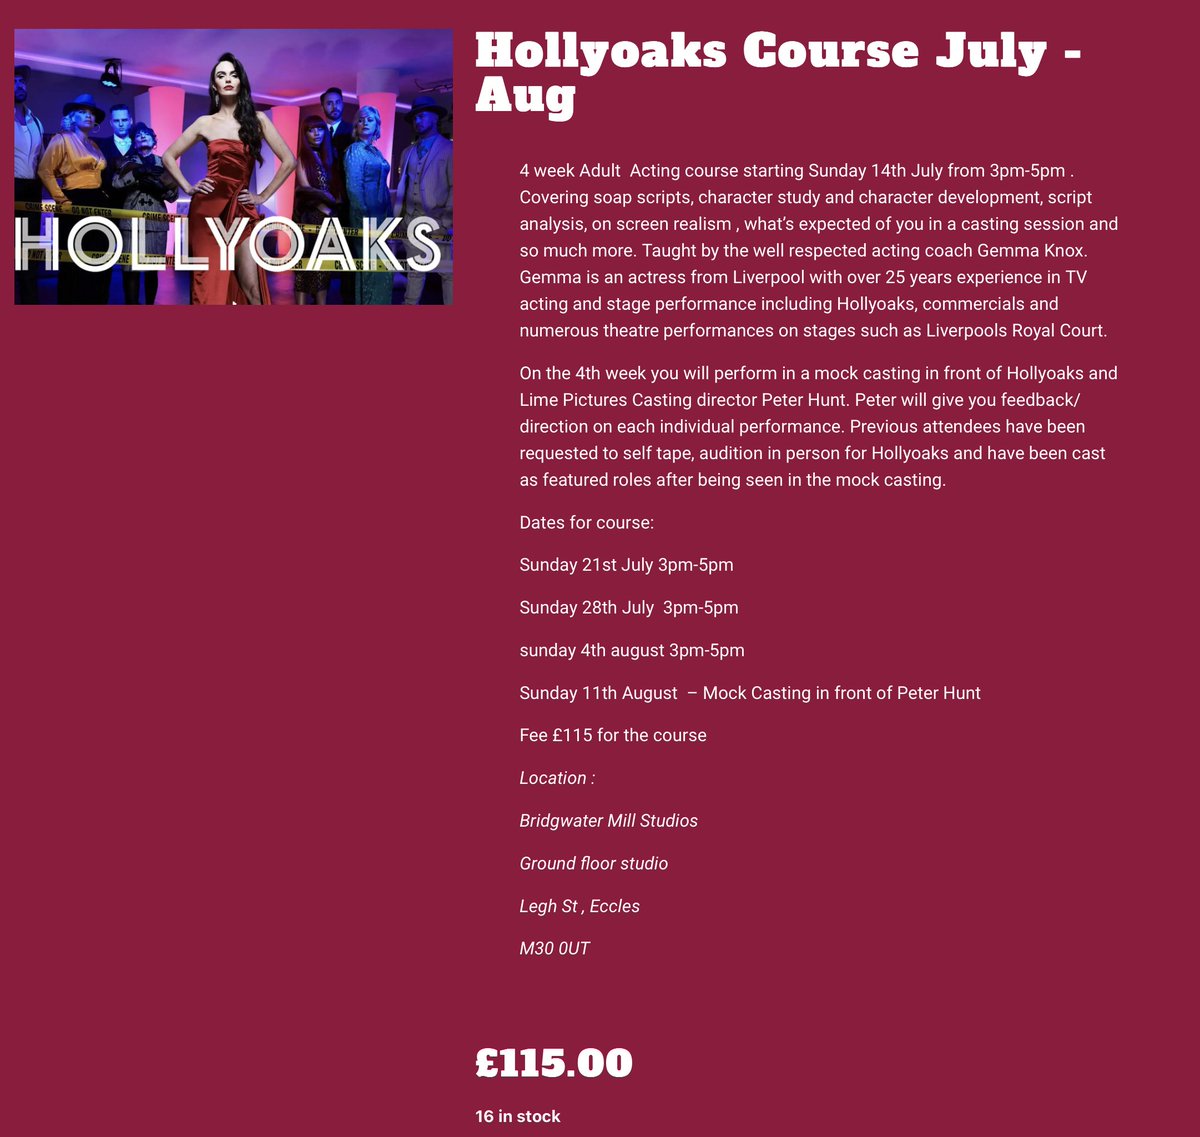 4week Adult Acting course starting July. Covering soap scripts, character study, script analysis, on screen realism +more. you will perform in a mock casting in front of Hollyoaks CD Peter Hunt. Peter will give you feedback & direction. screenplayacting.com/hollyoaks-cour…